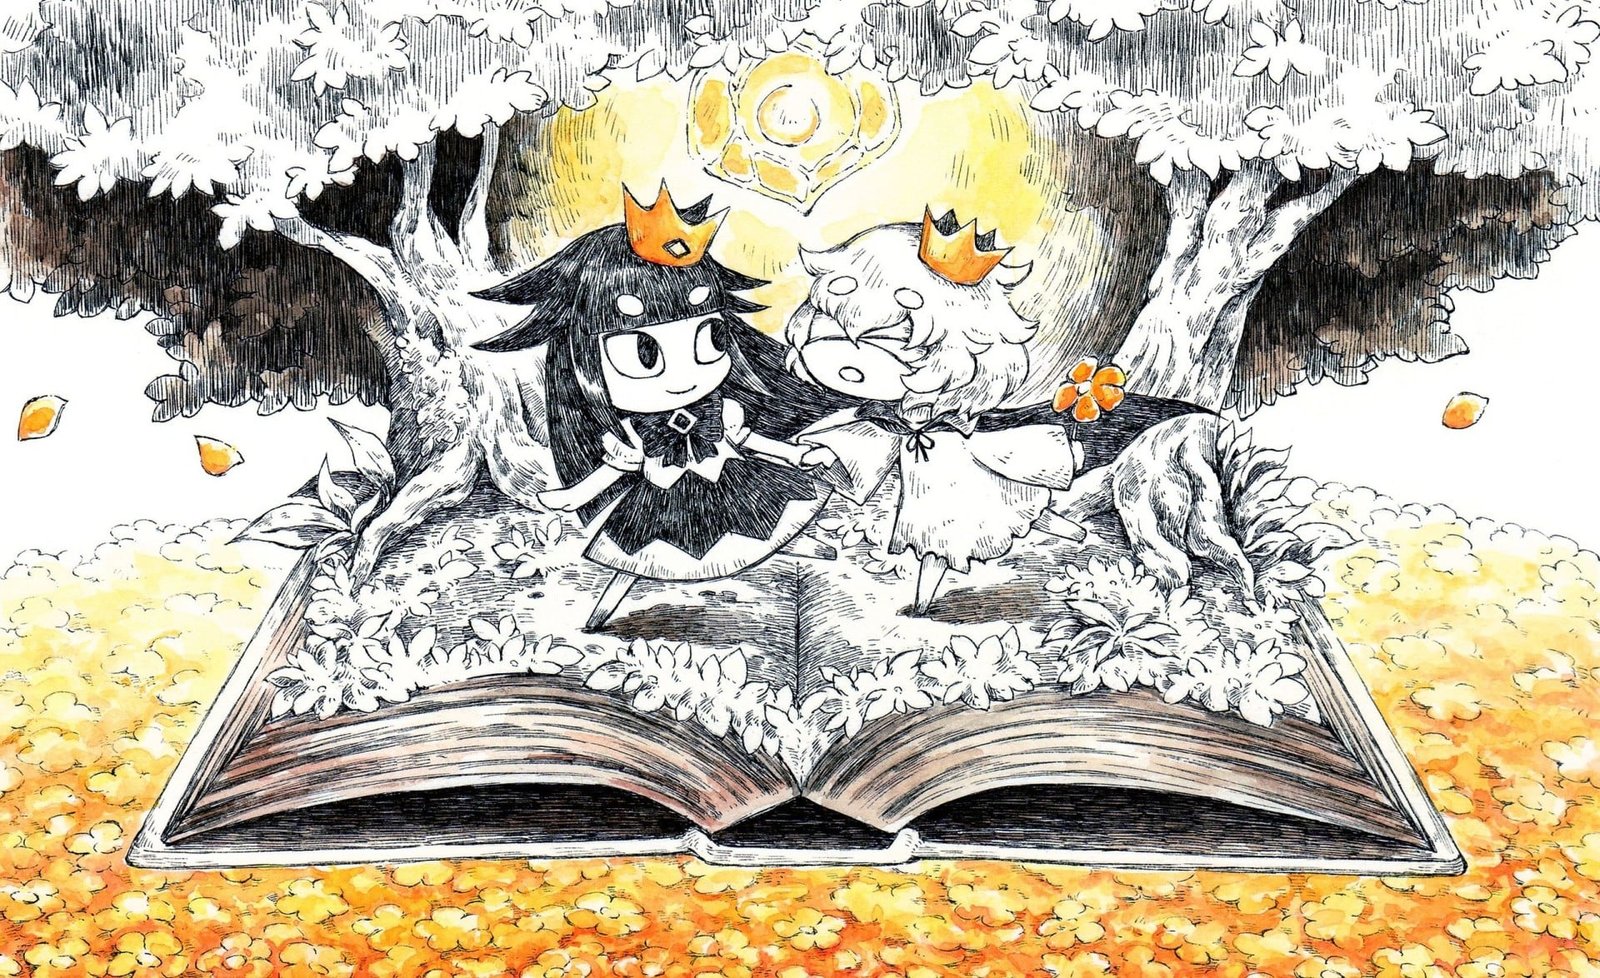 Review – The Liar Princess and the Blind Prince